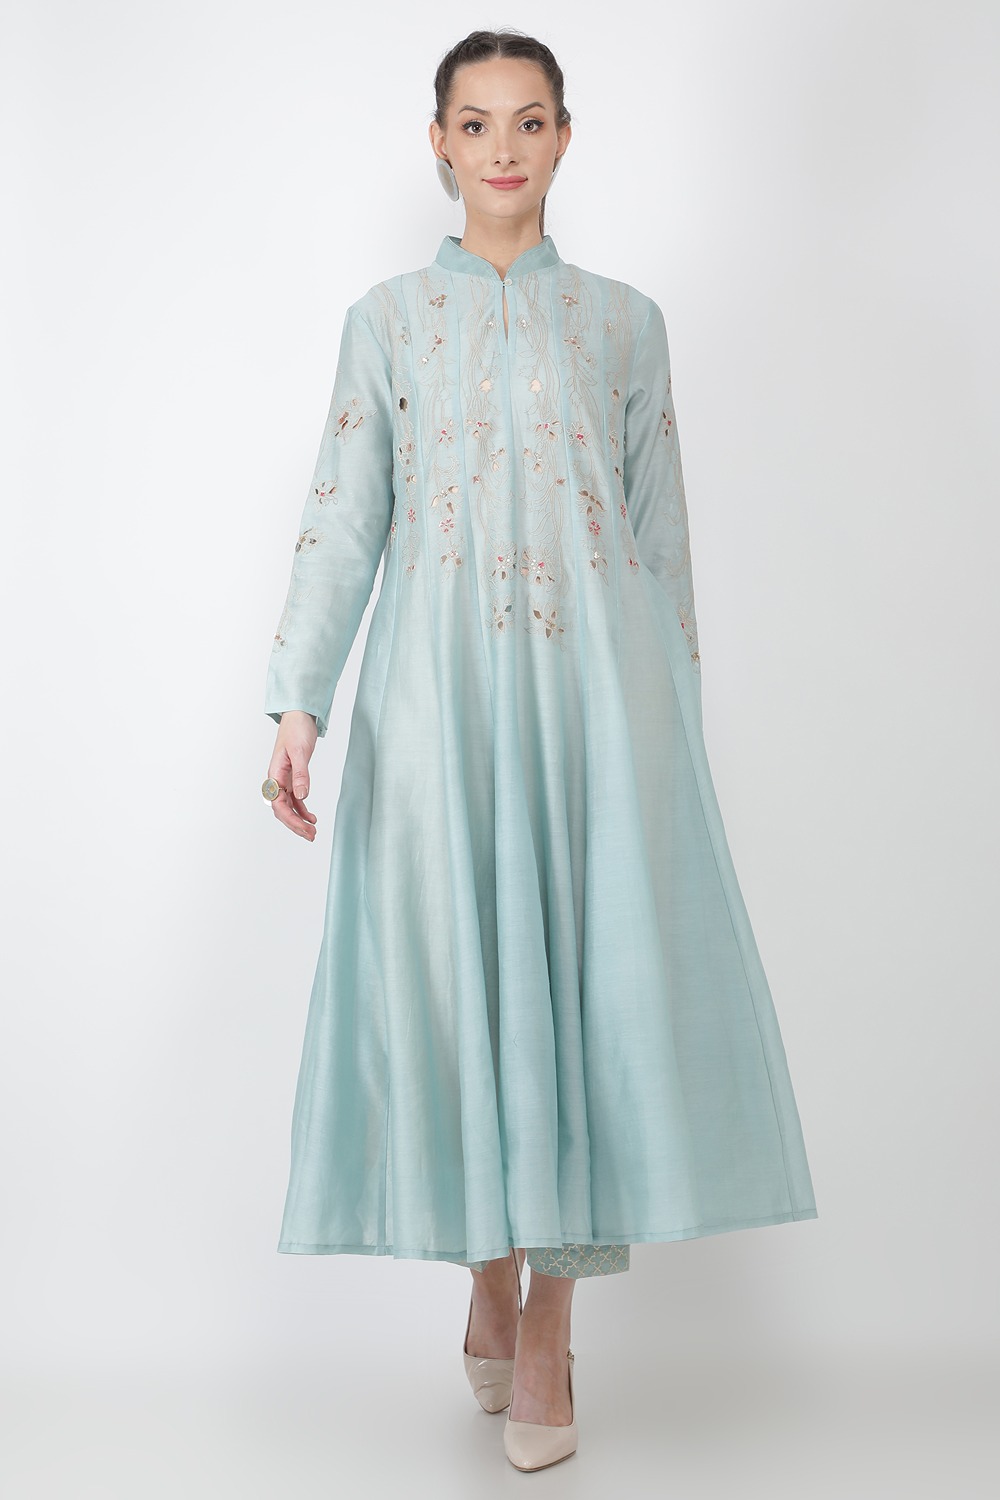 Cutwork Kalidar With Contrast Inner And Pants